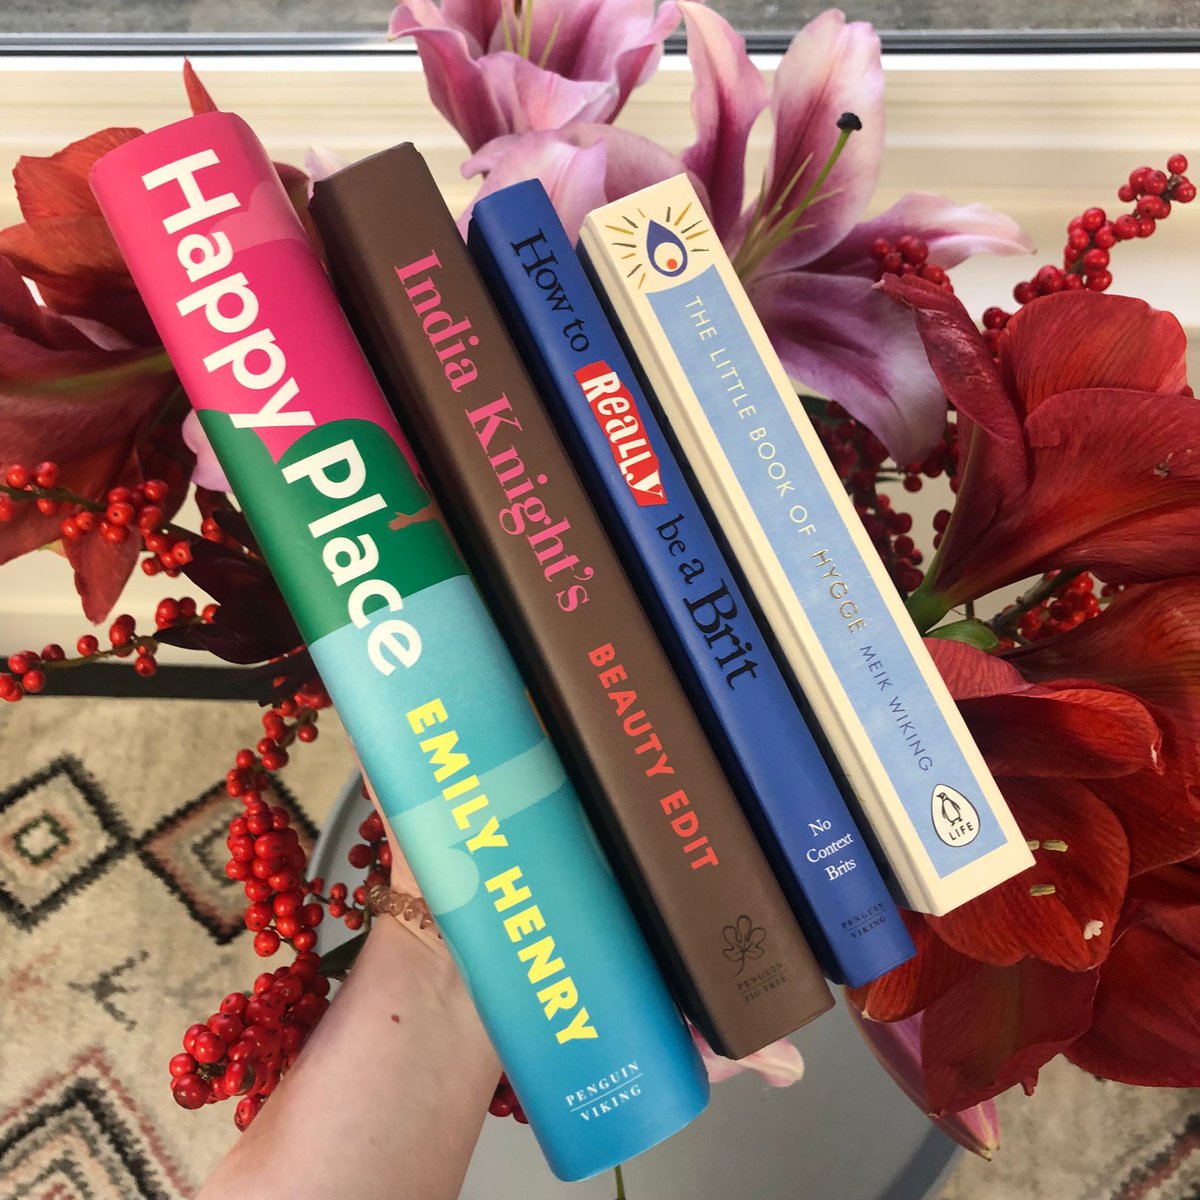 Looking for a last minute Christmas present? Here are just a couple of books we think make the perfect gift: ✨ Happy Place ✨ India Knight’s Beauty Edit ✨ How To Really Be A Brit ✨ The Little Book Of Hygge